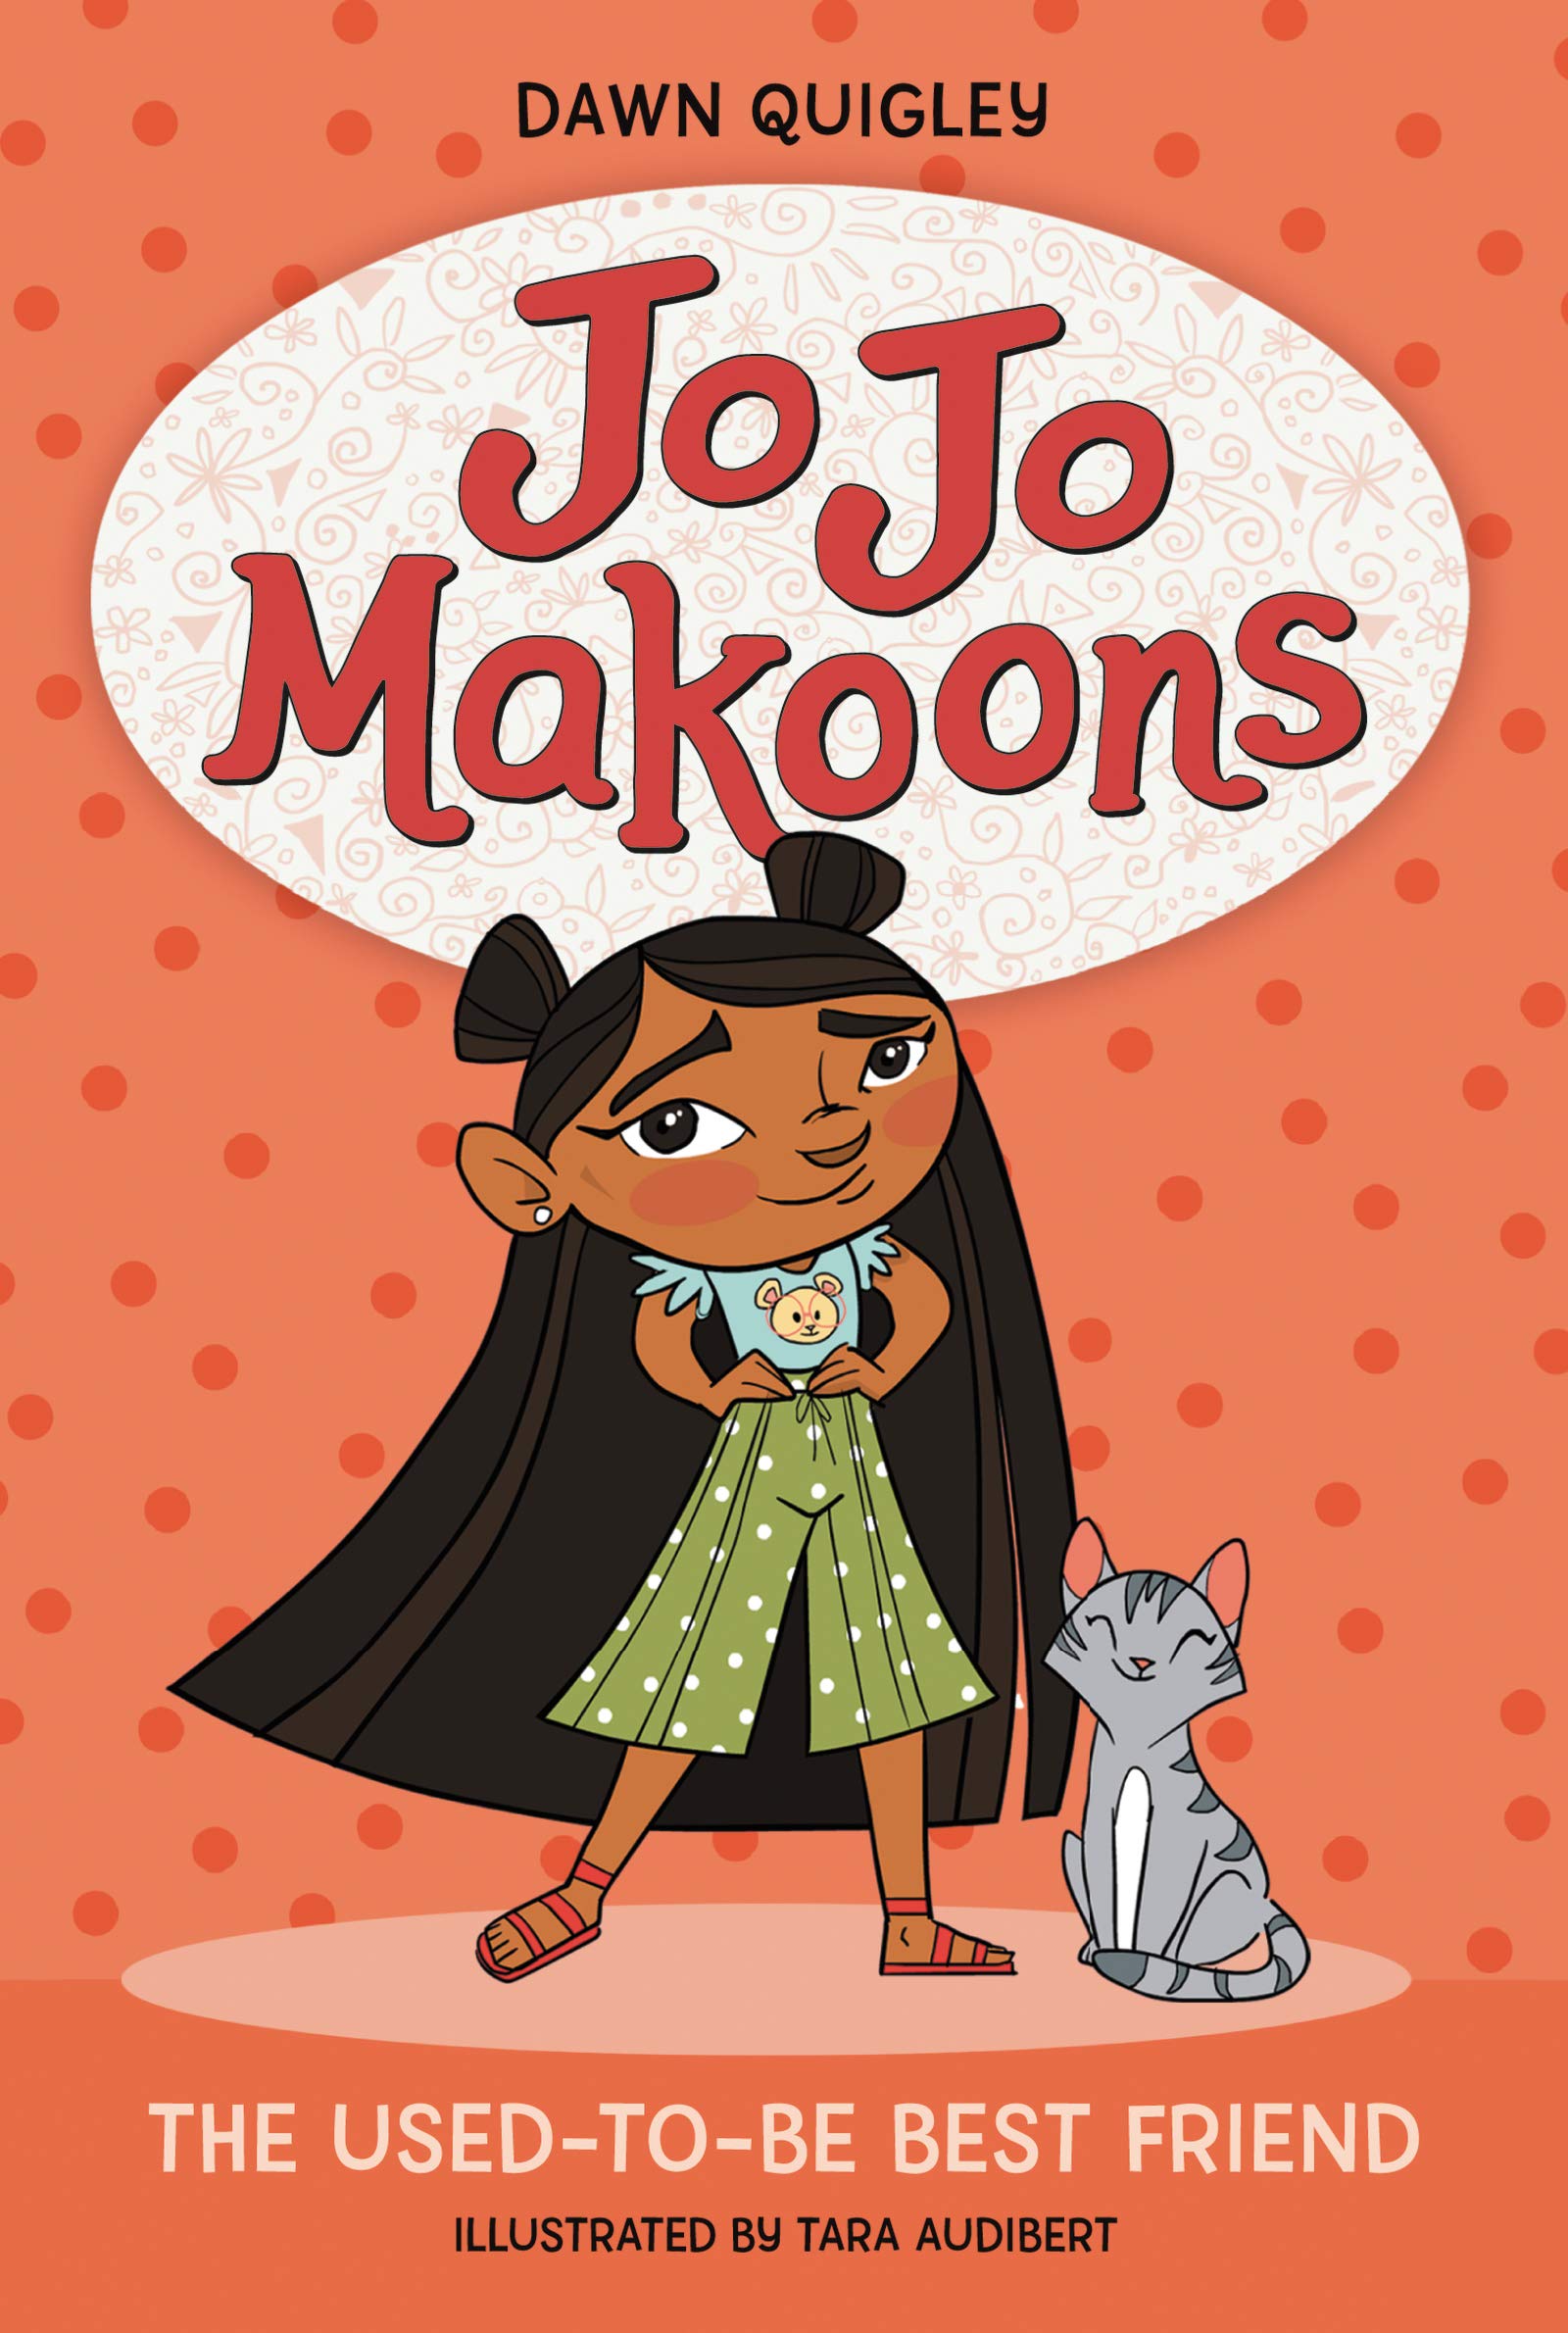 Cover of JoJo Makoons: The Used-to-Be Best Friend, by Dawn Quigley, showing a girl with very long dark brown hair standing with hands on her hips with a gray cat sitting next to her, on an orange background.